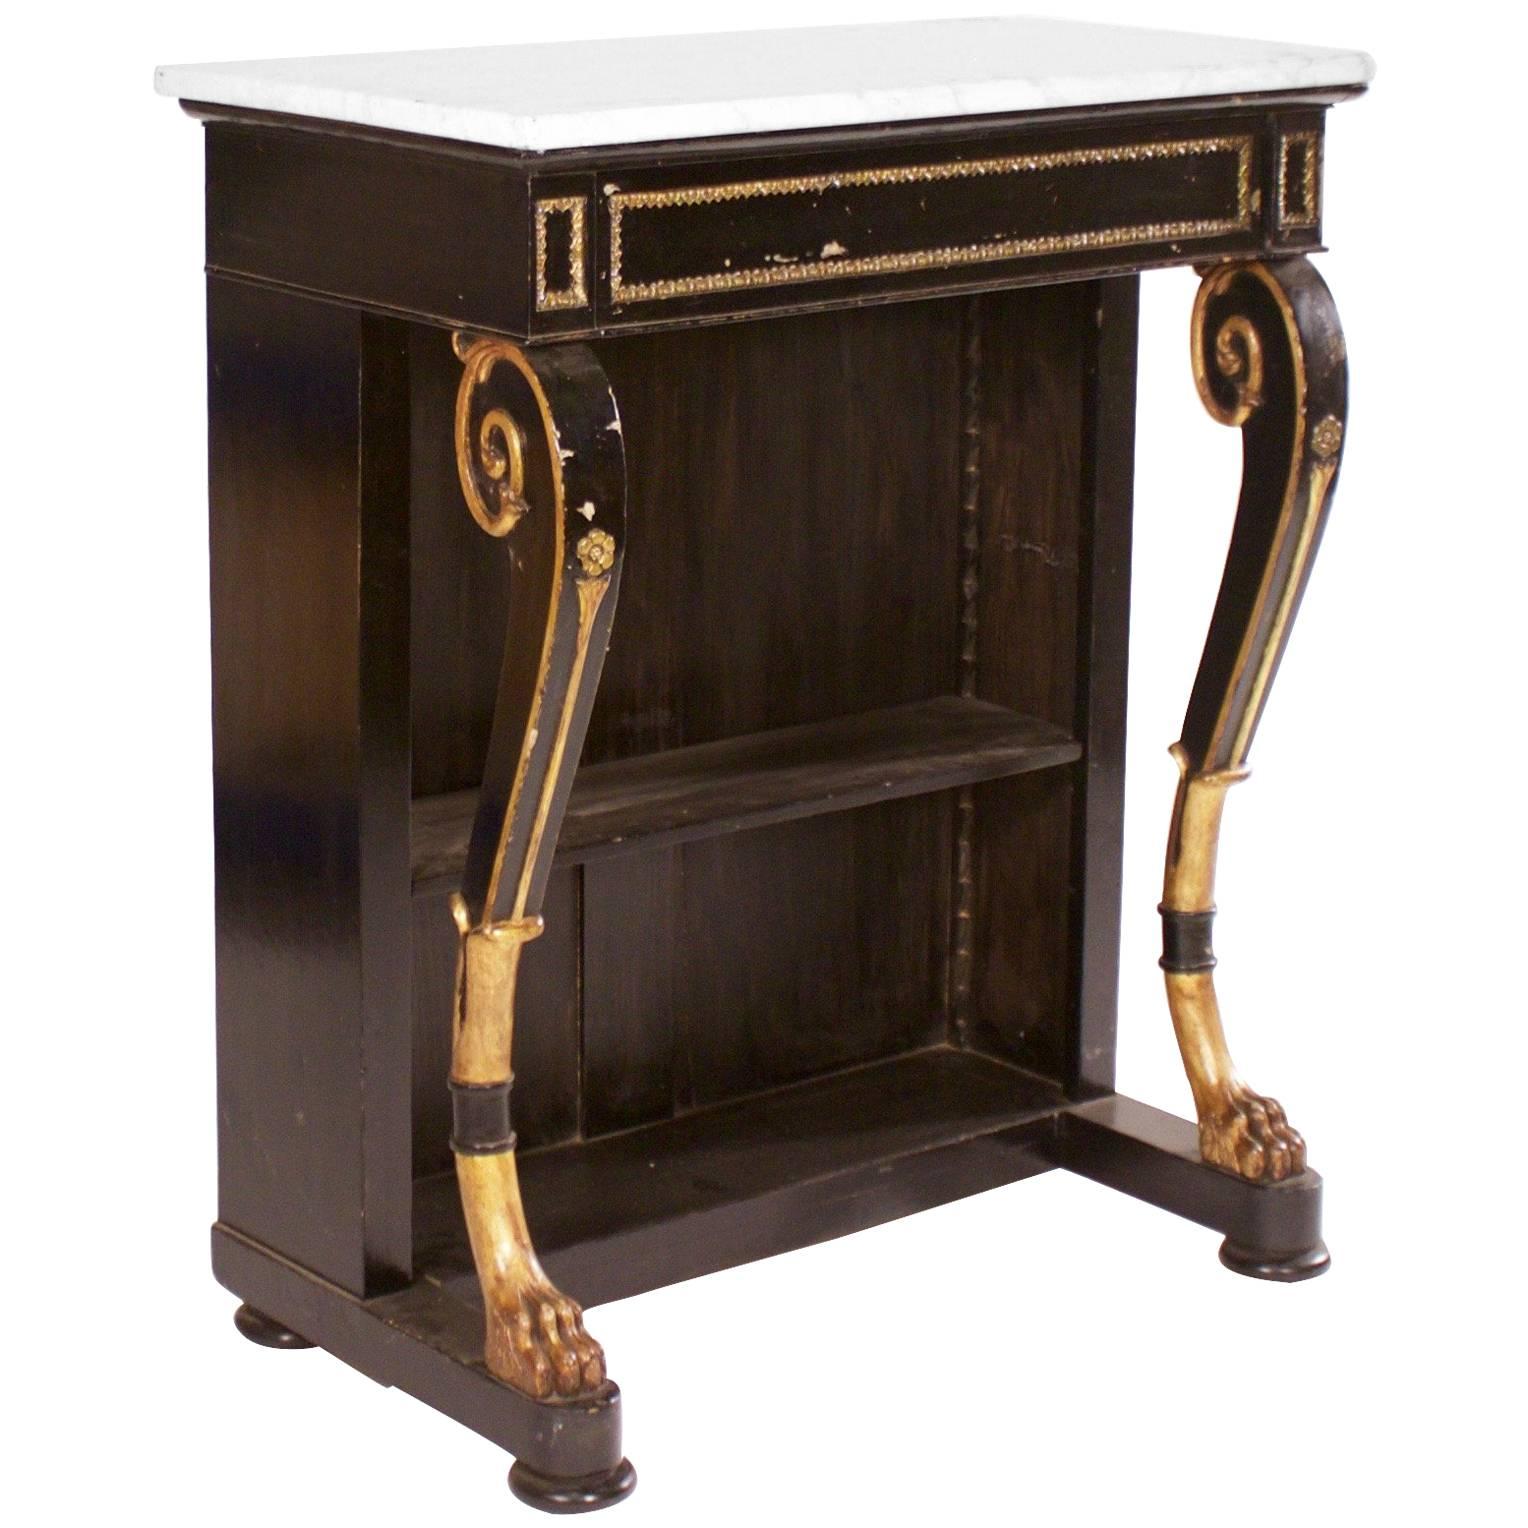 Regency Ebonised and Parcel-Gilt Console in the Manner of William Trotter